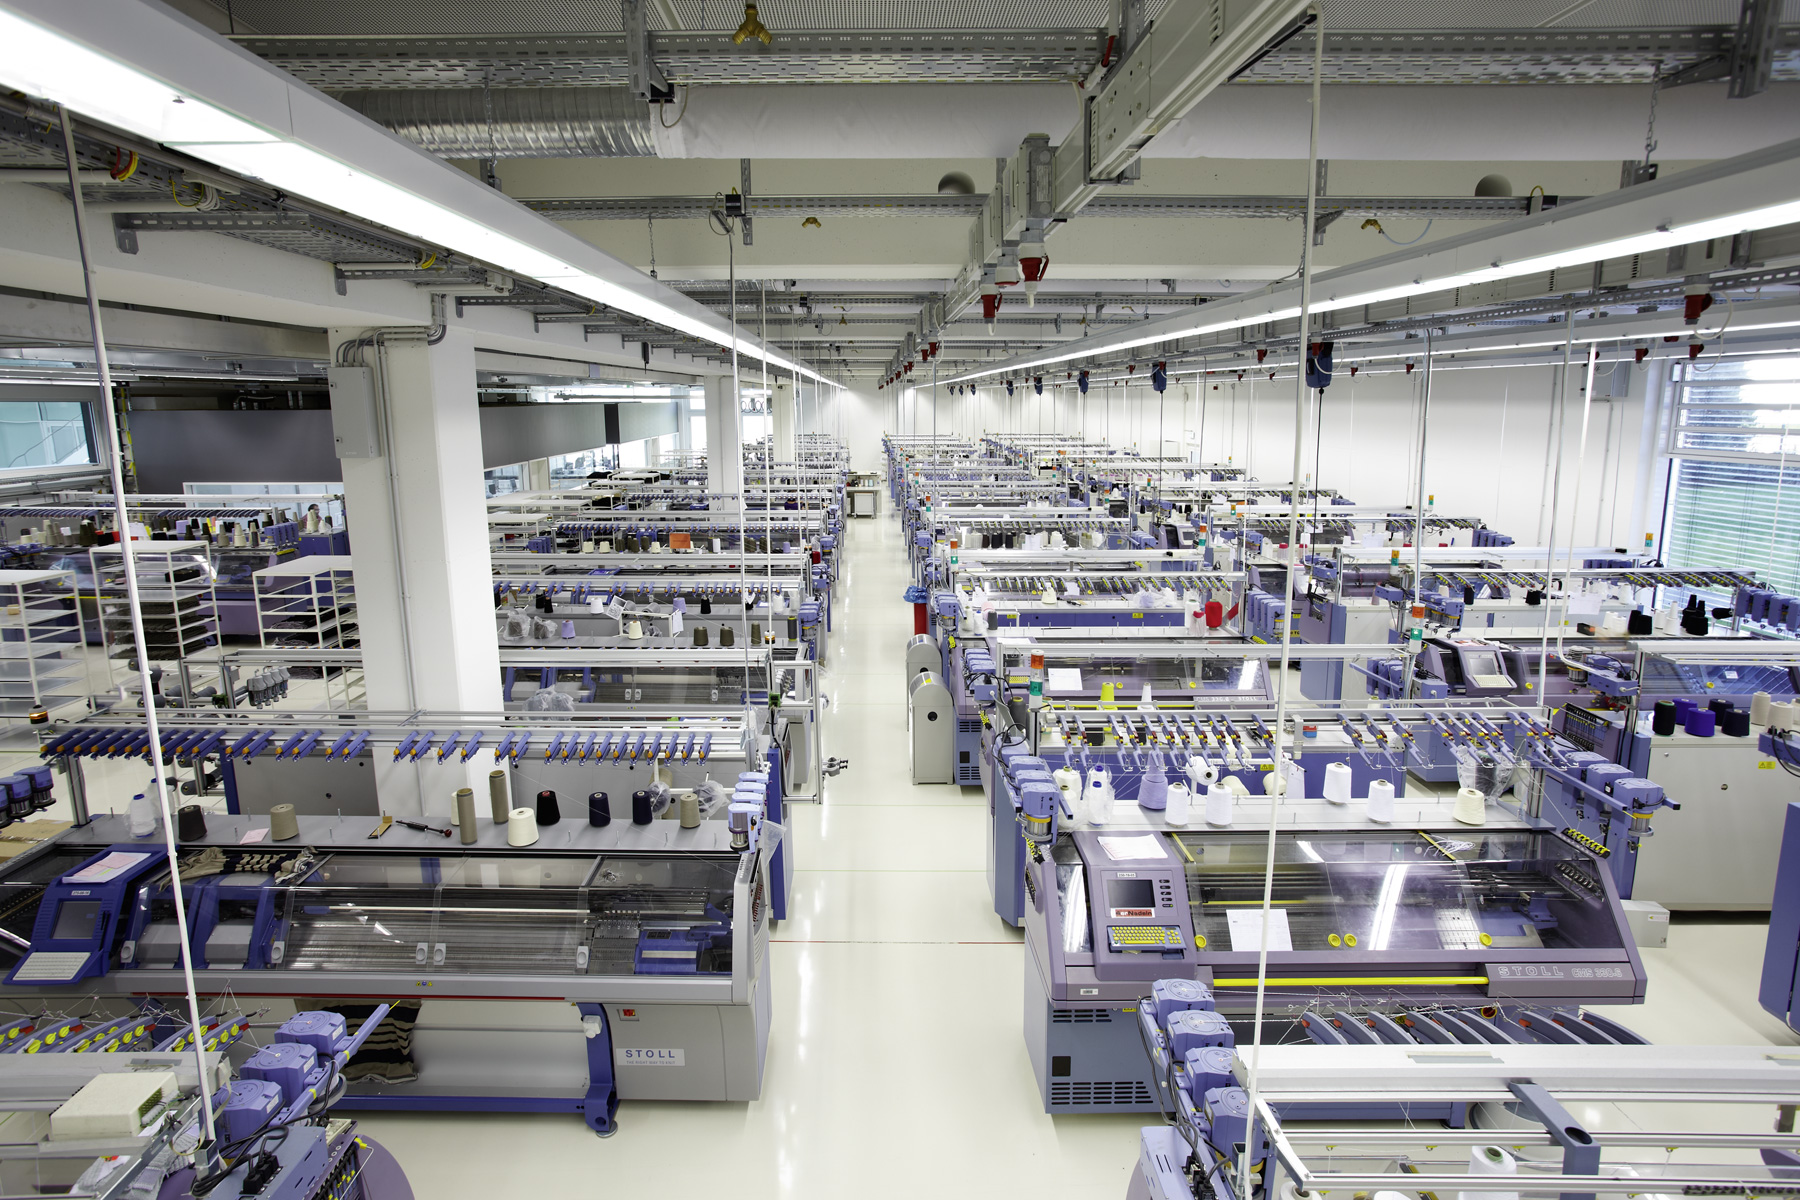 Stoll flat knitting machines produce knitwear in Bodelshausen. © Marc Cain